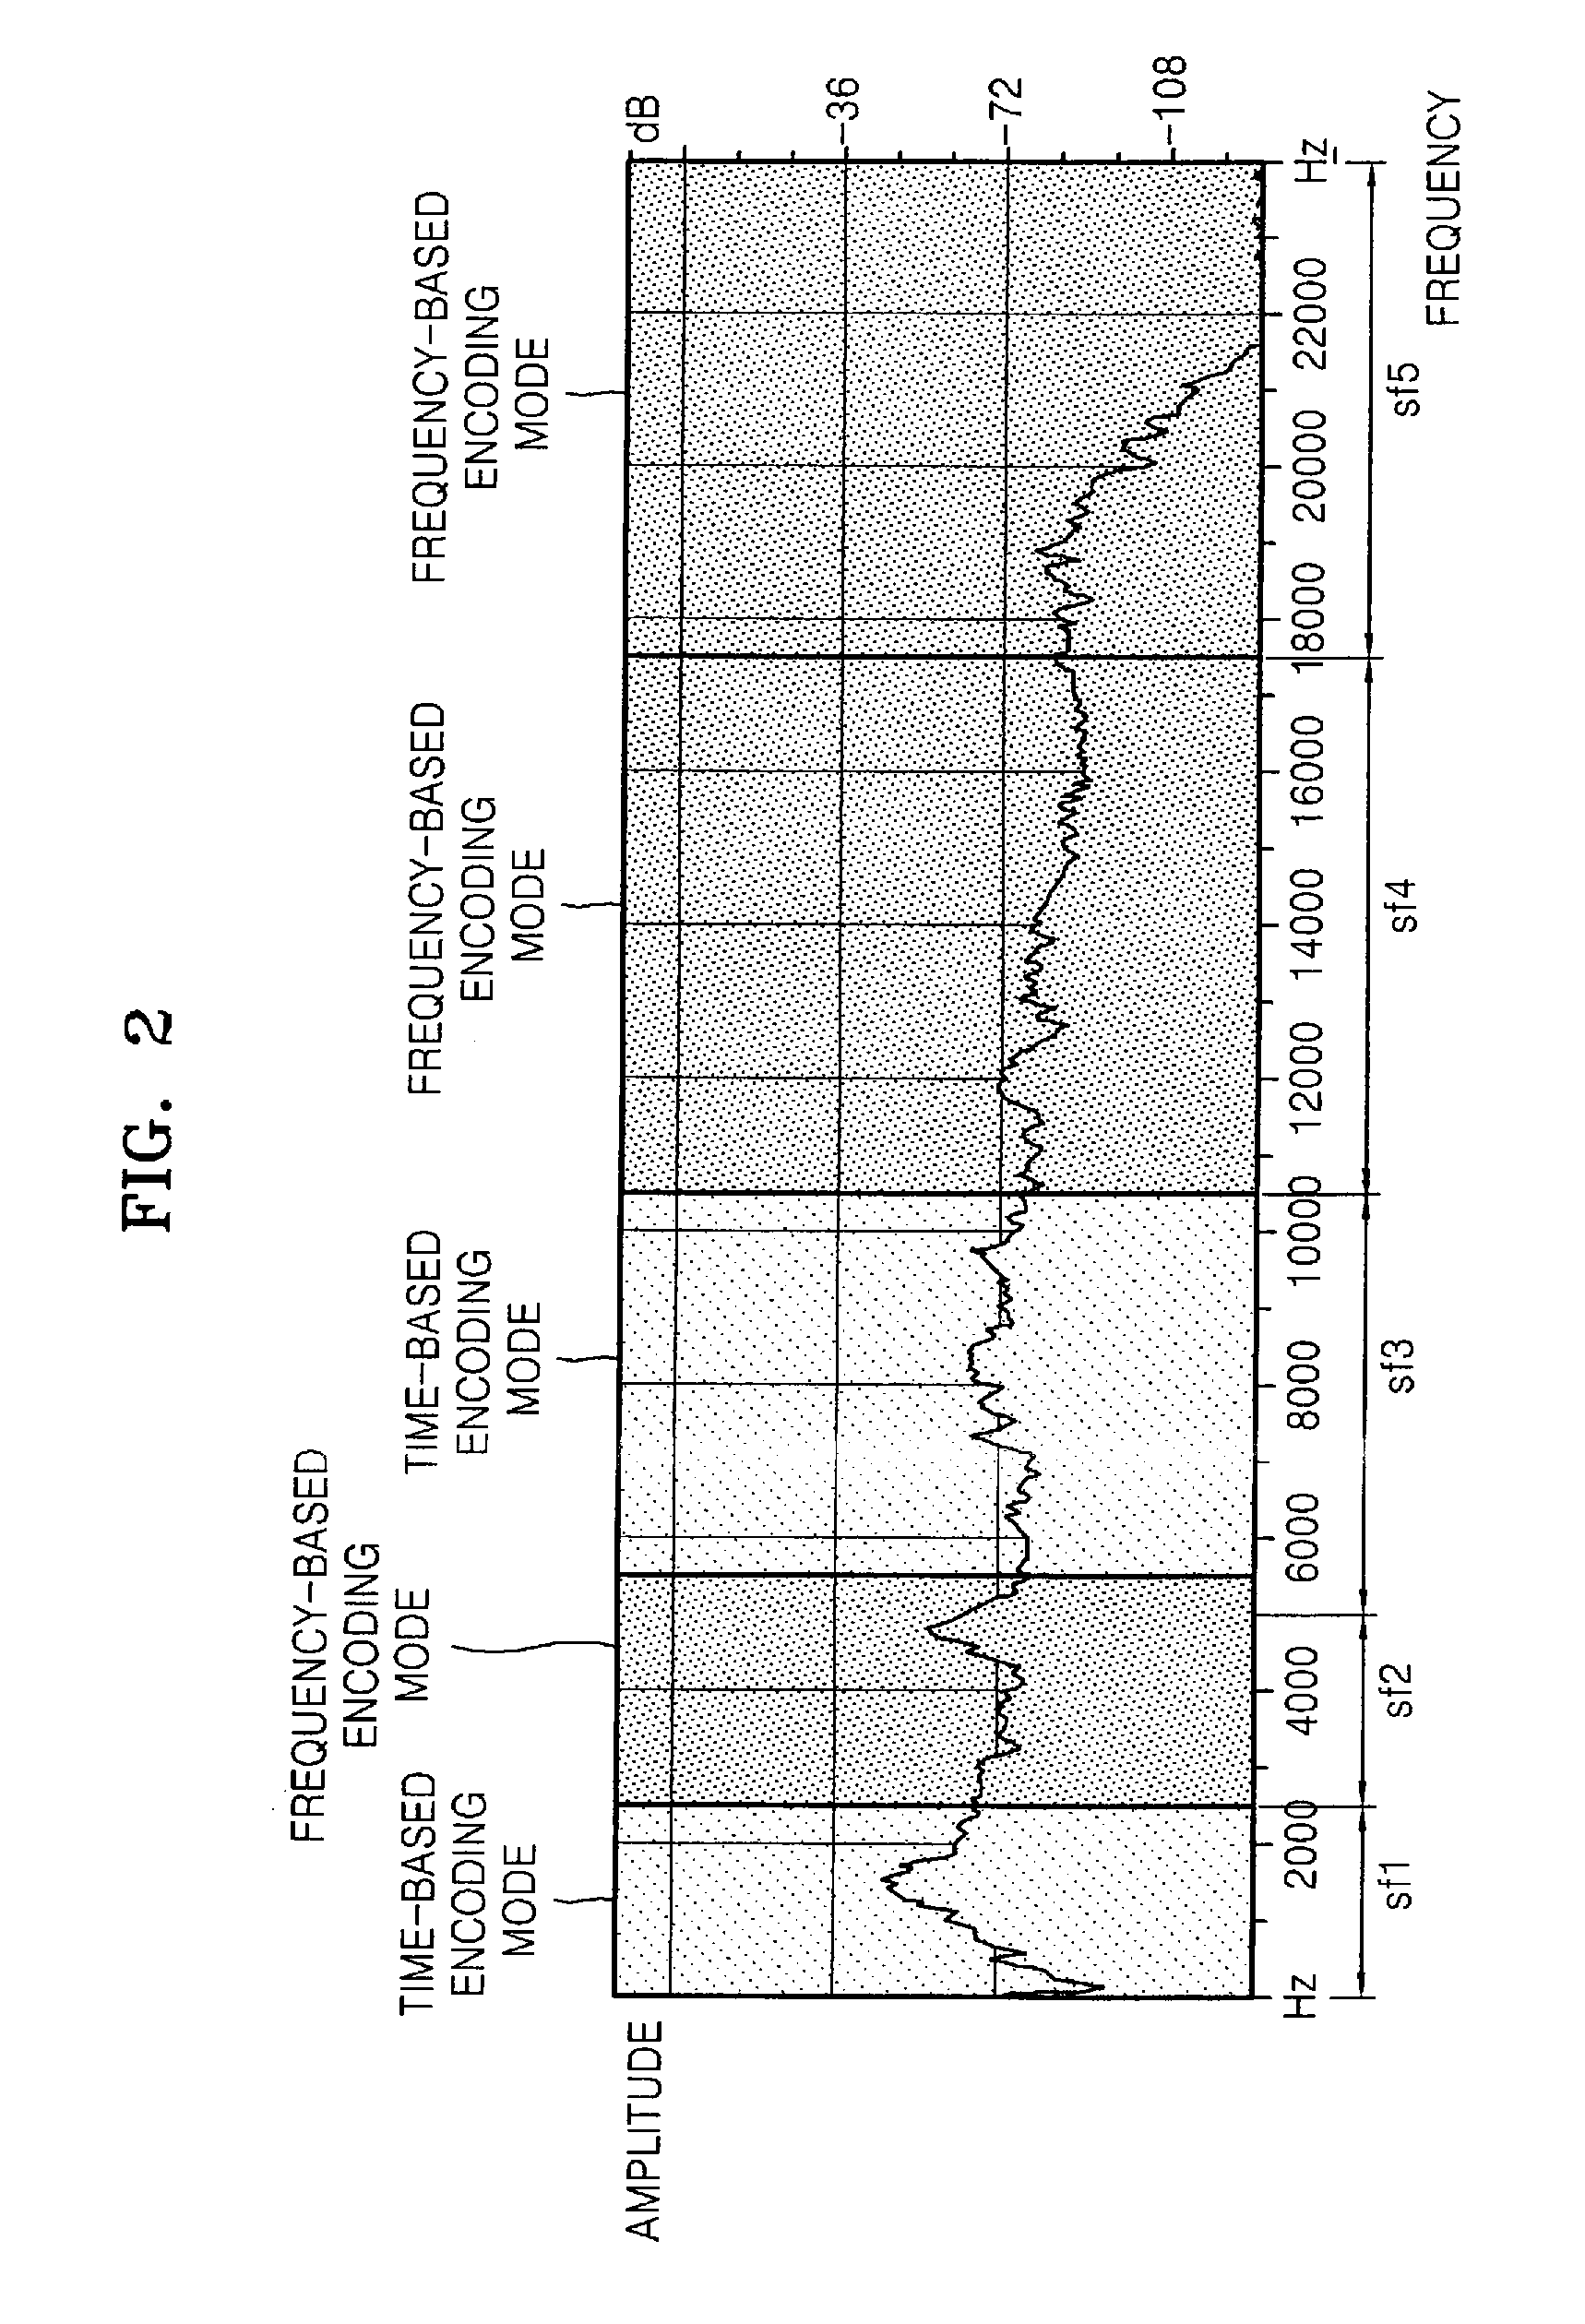 Adaptive time/frequency-based audio encoding and decoding apparatuses and methods